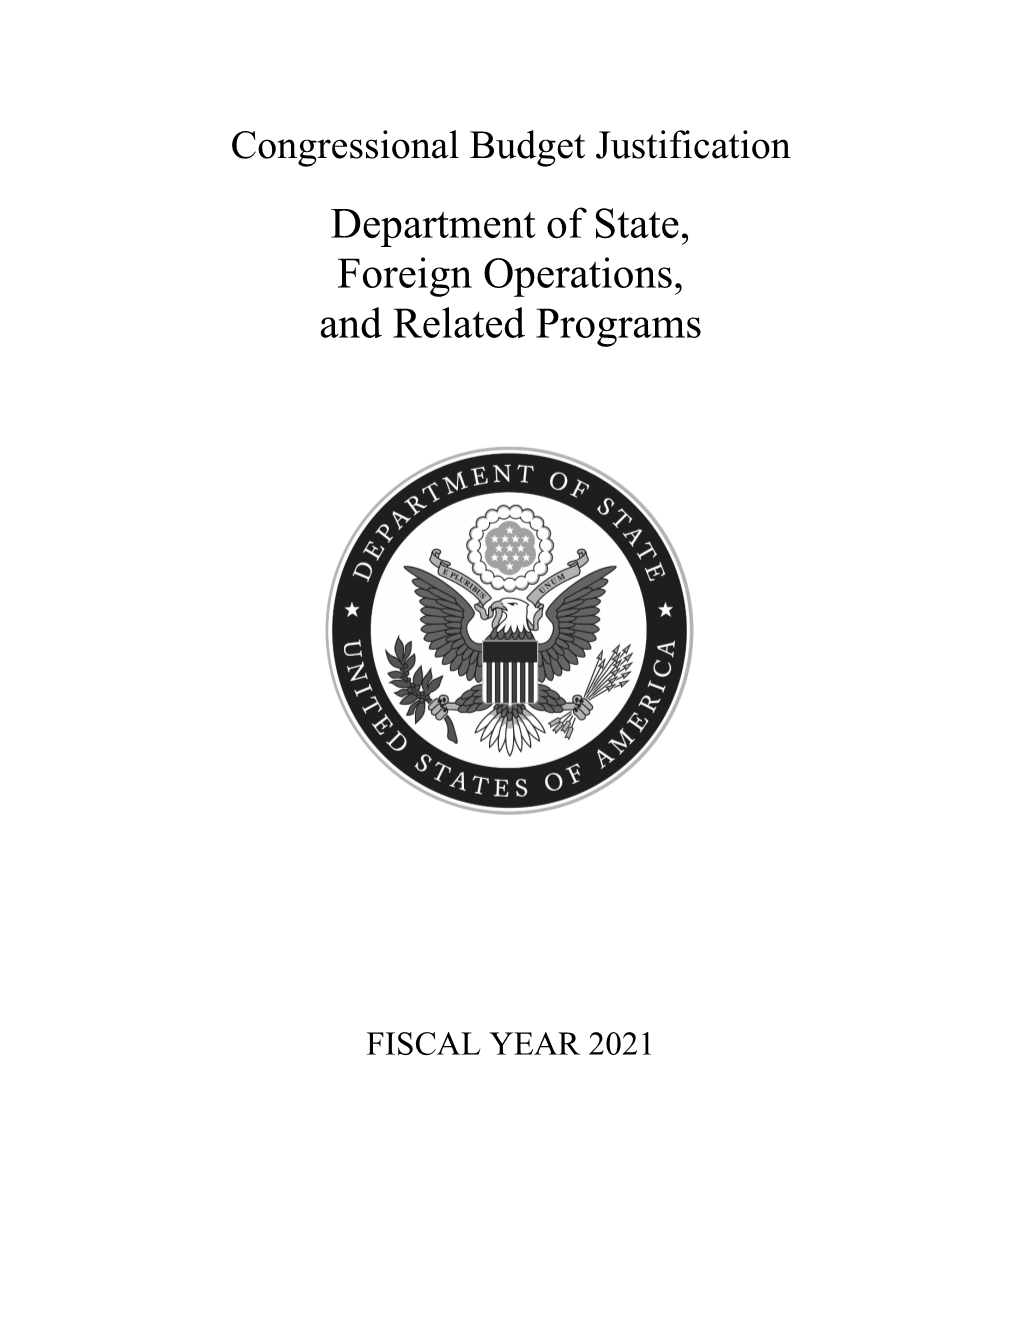 Department of State, Foreign Operations, and Related Programs